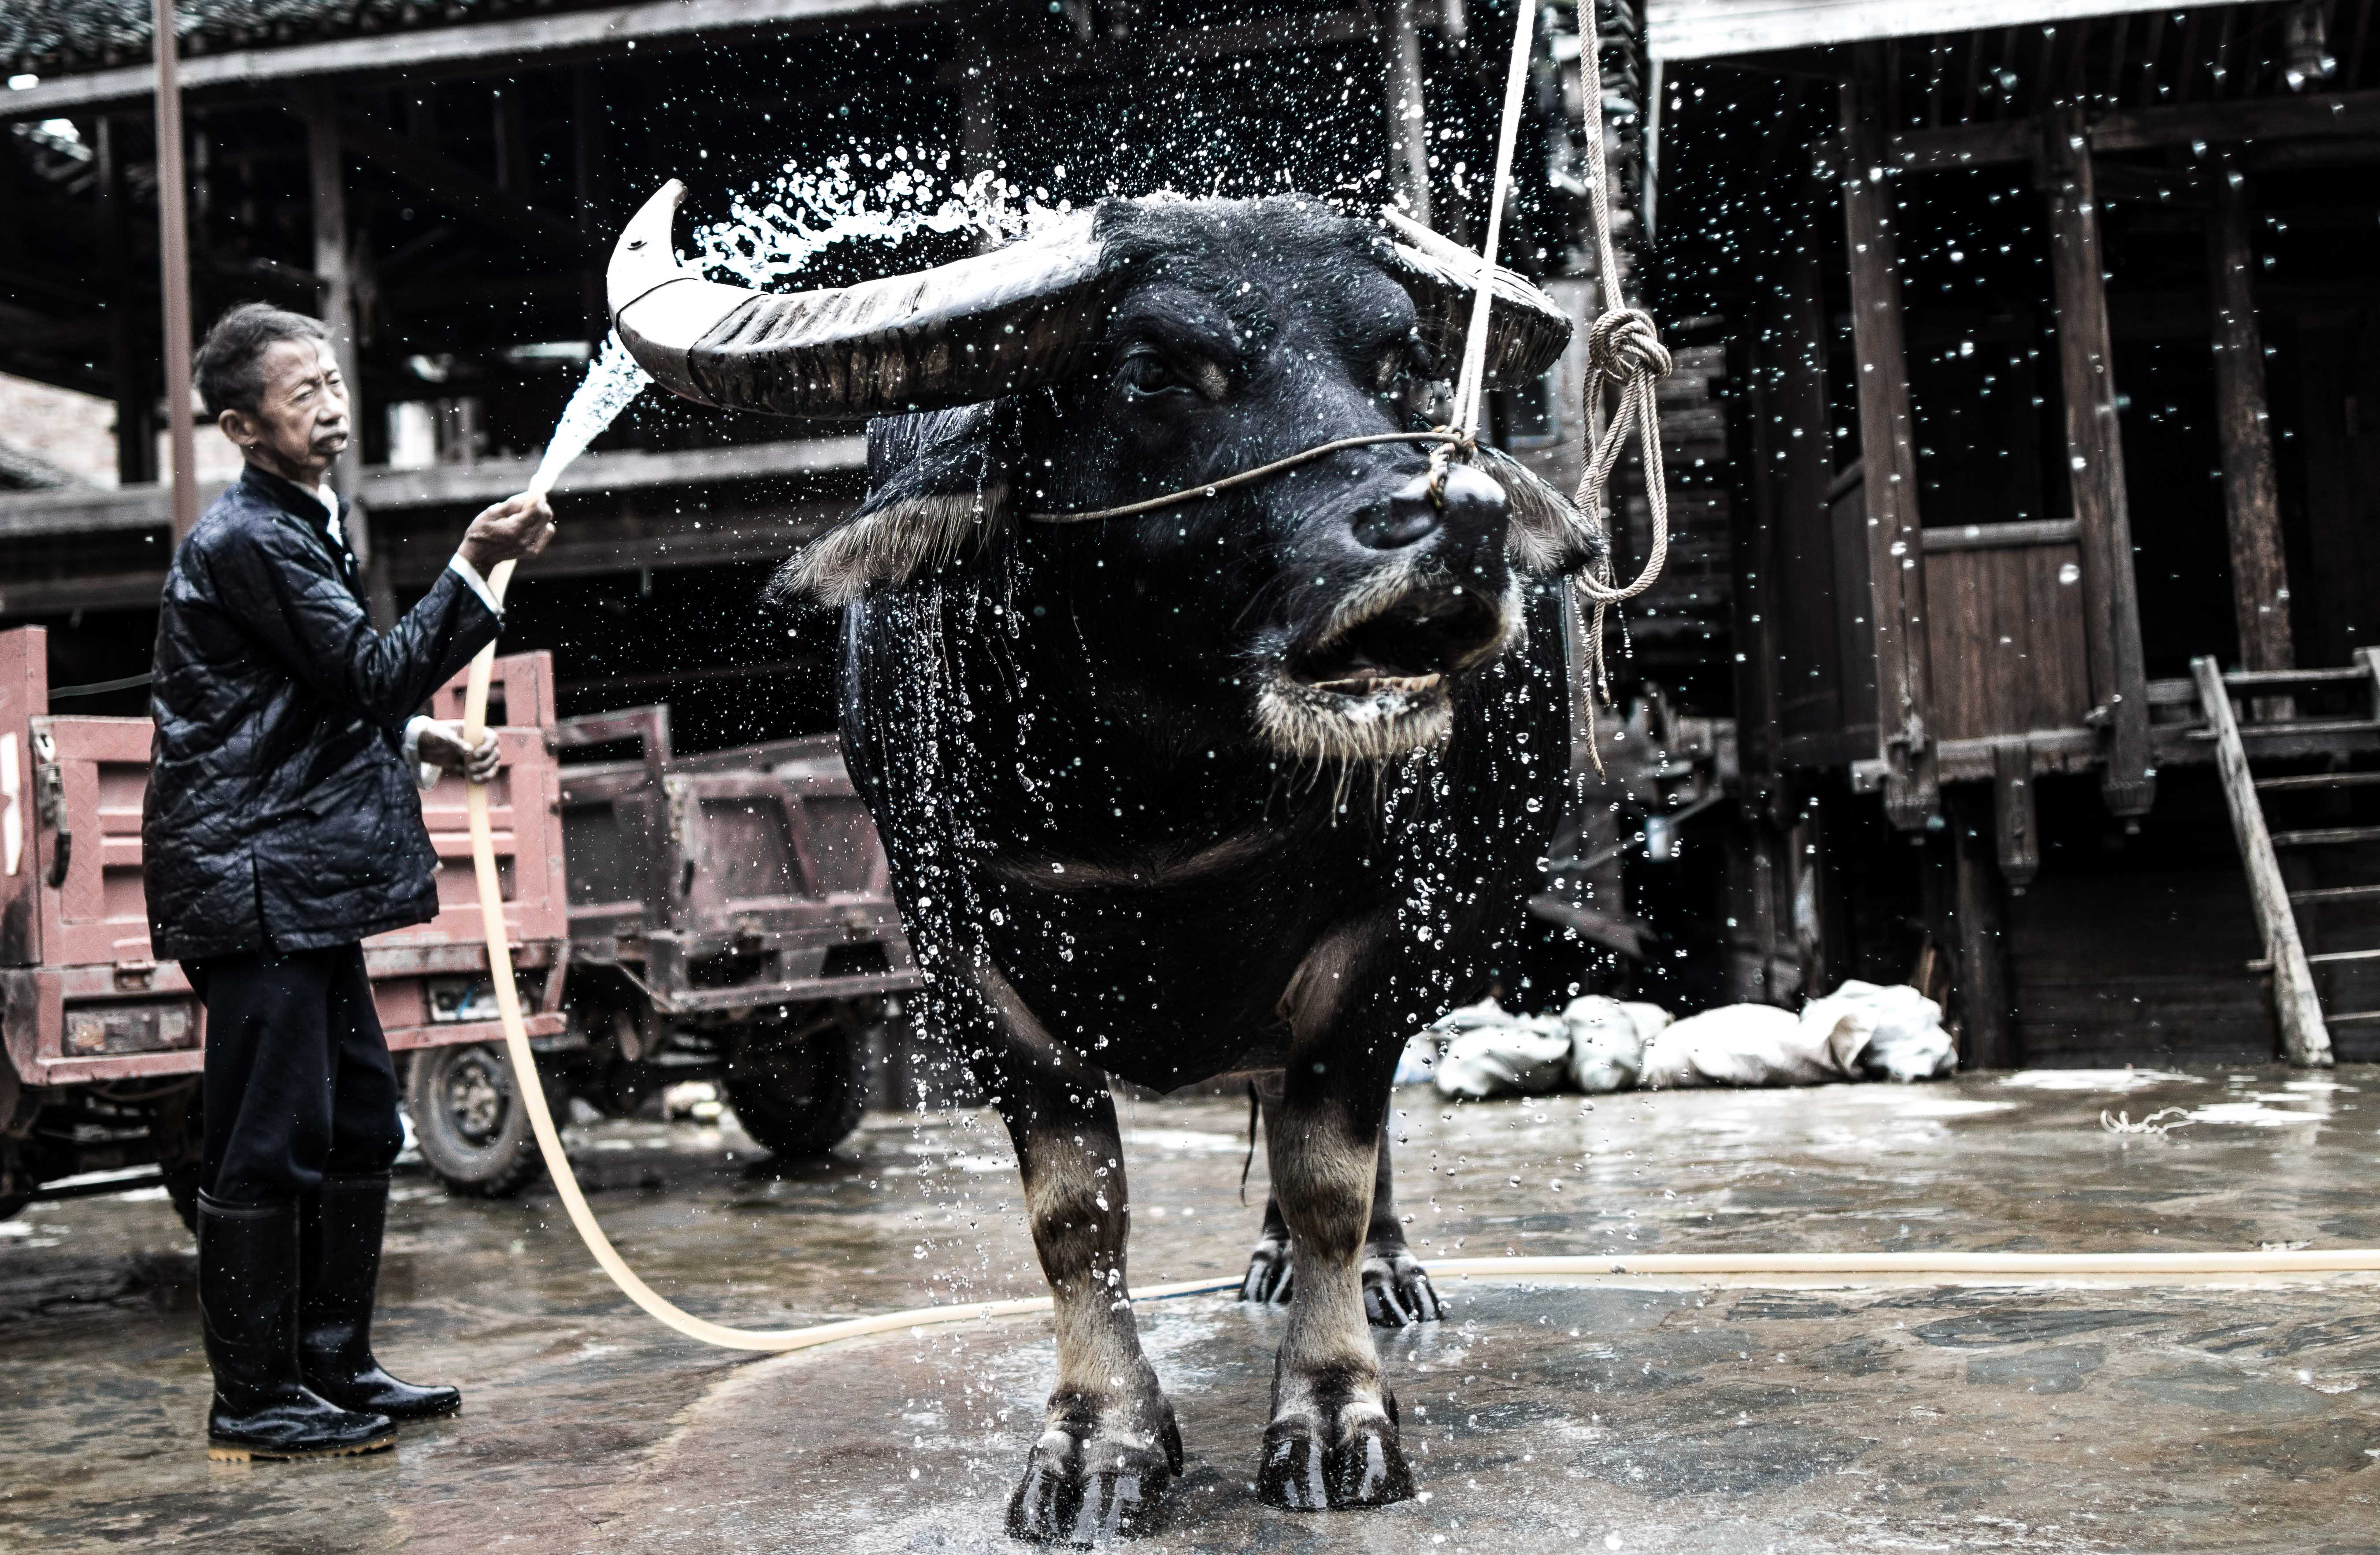 Water buffalo fighting festival is an ancient tradition in Guizhou province. Every single village has his own buffalo, and villagers take care of them before and after the fight as a coach with his boxer.